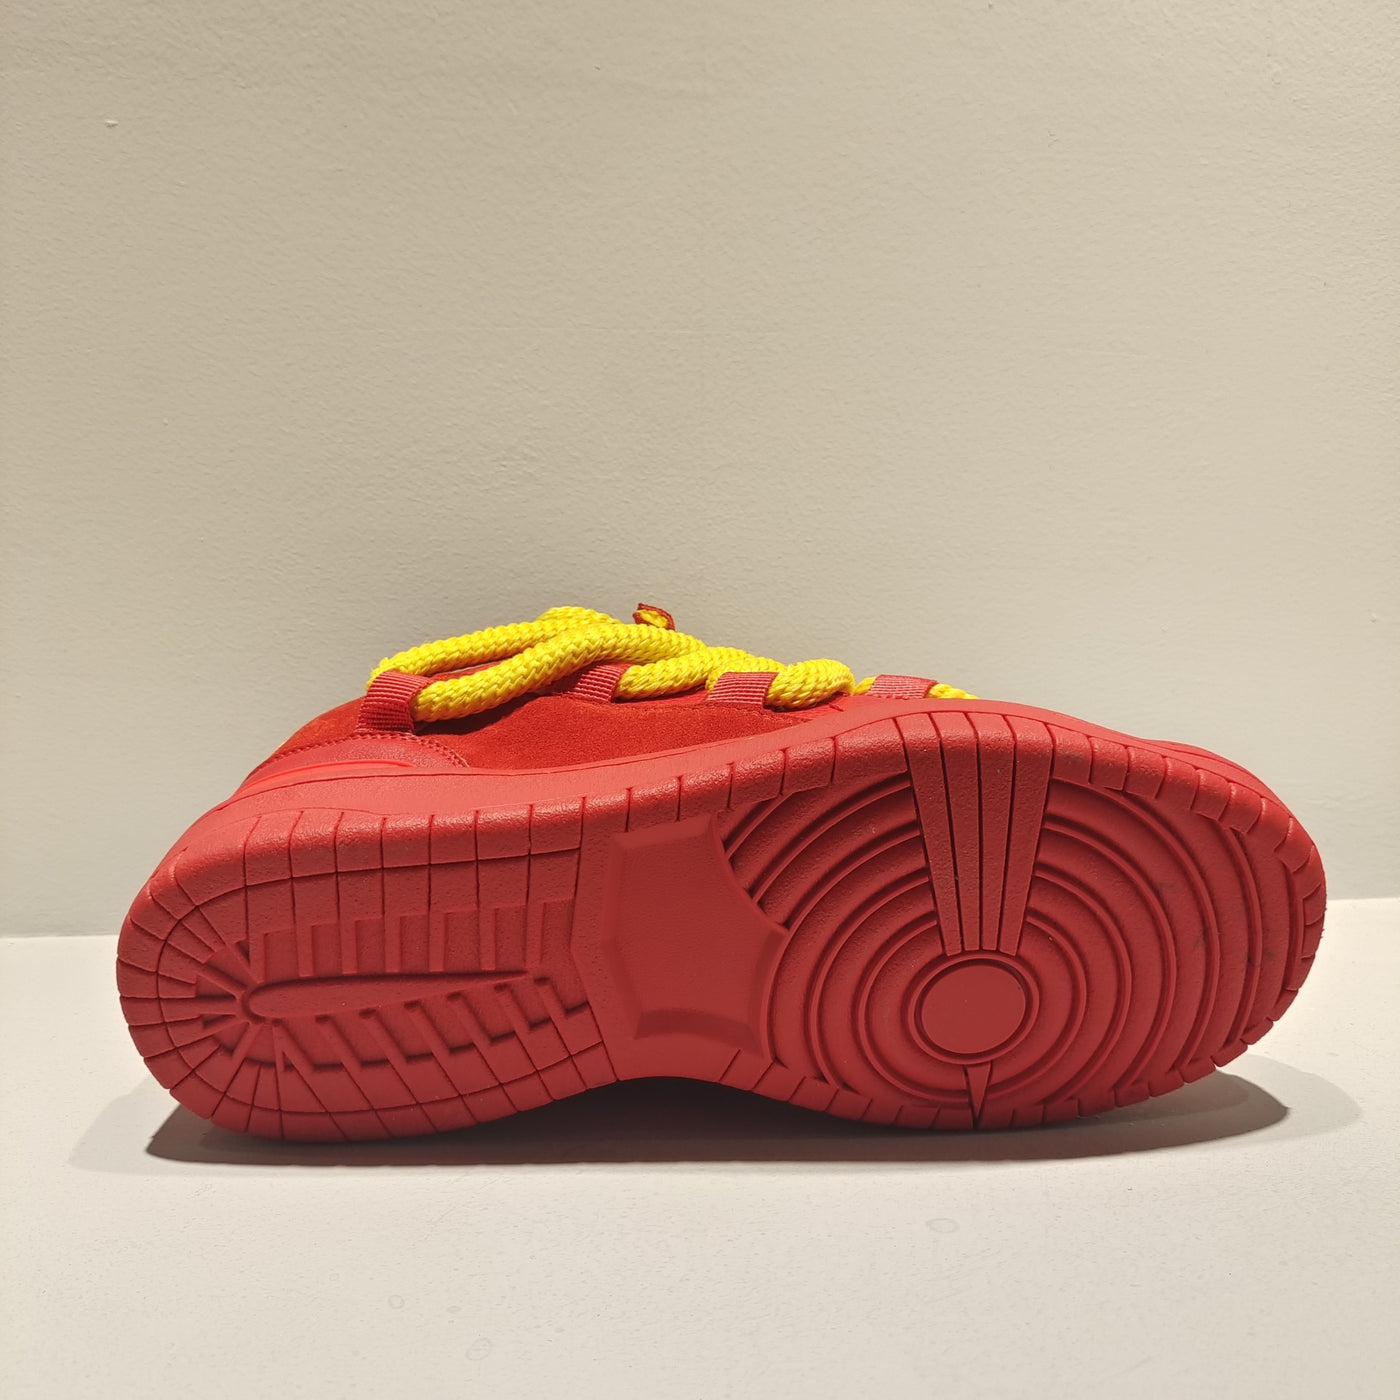 The Fries Sneakers